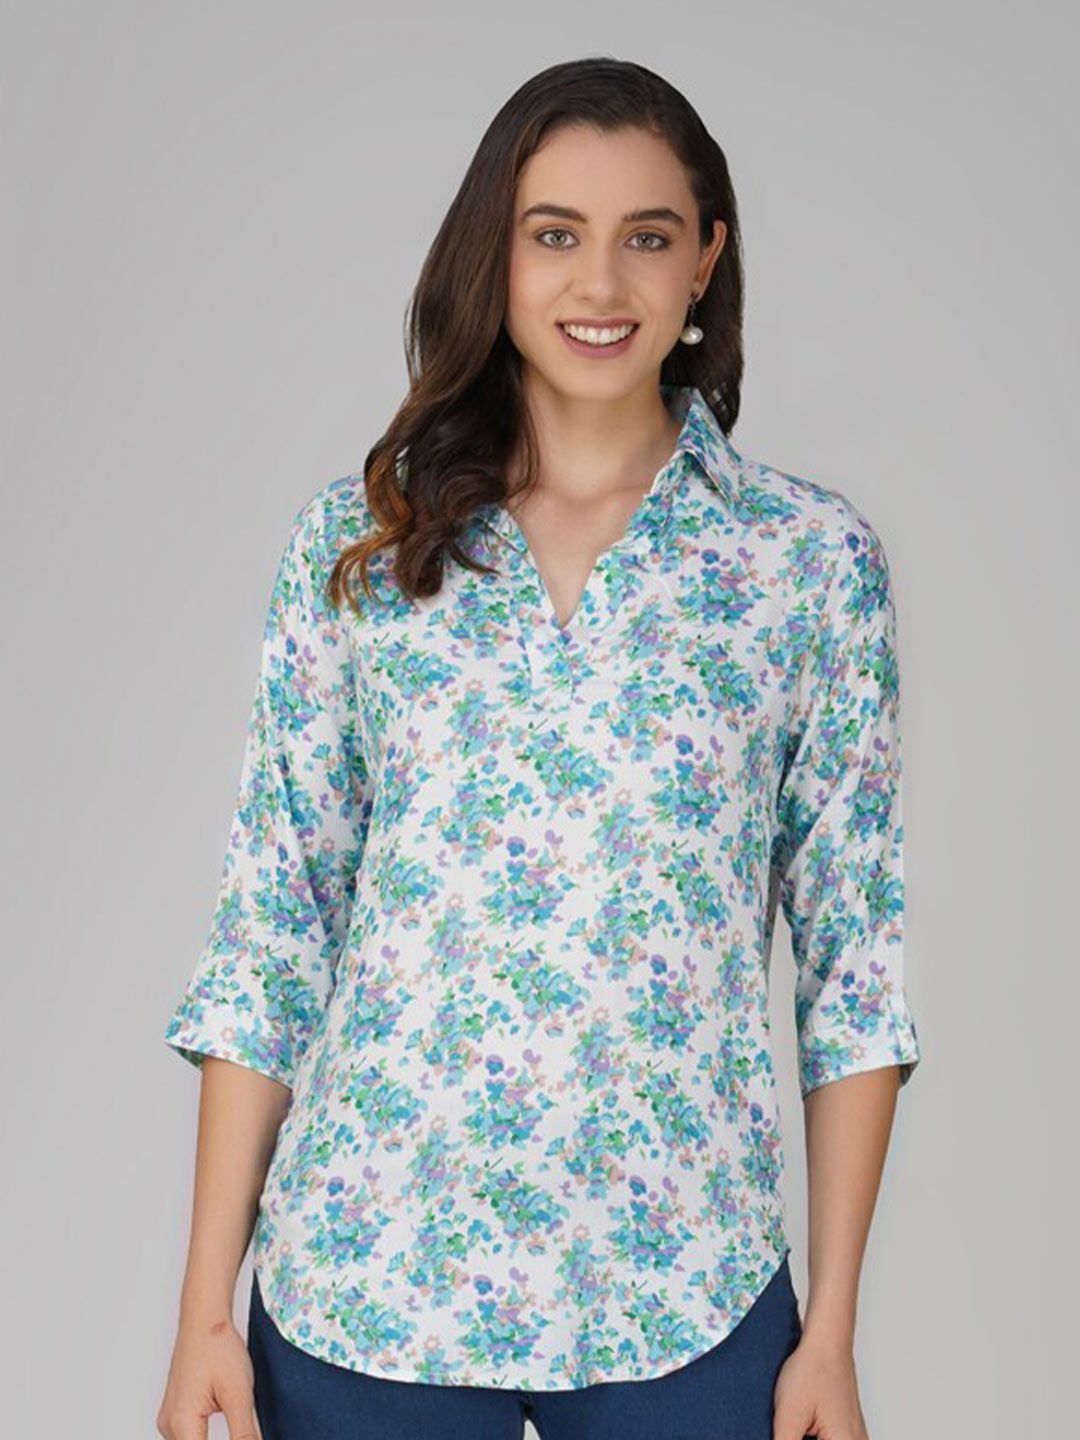 Vastraa Fusion Floral Printed Shirt Collar Roll Up Sleeves Regular Top Price in India